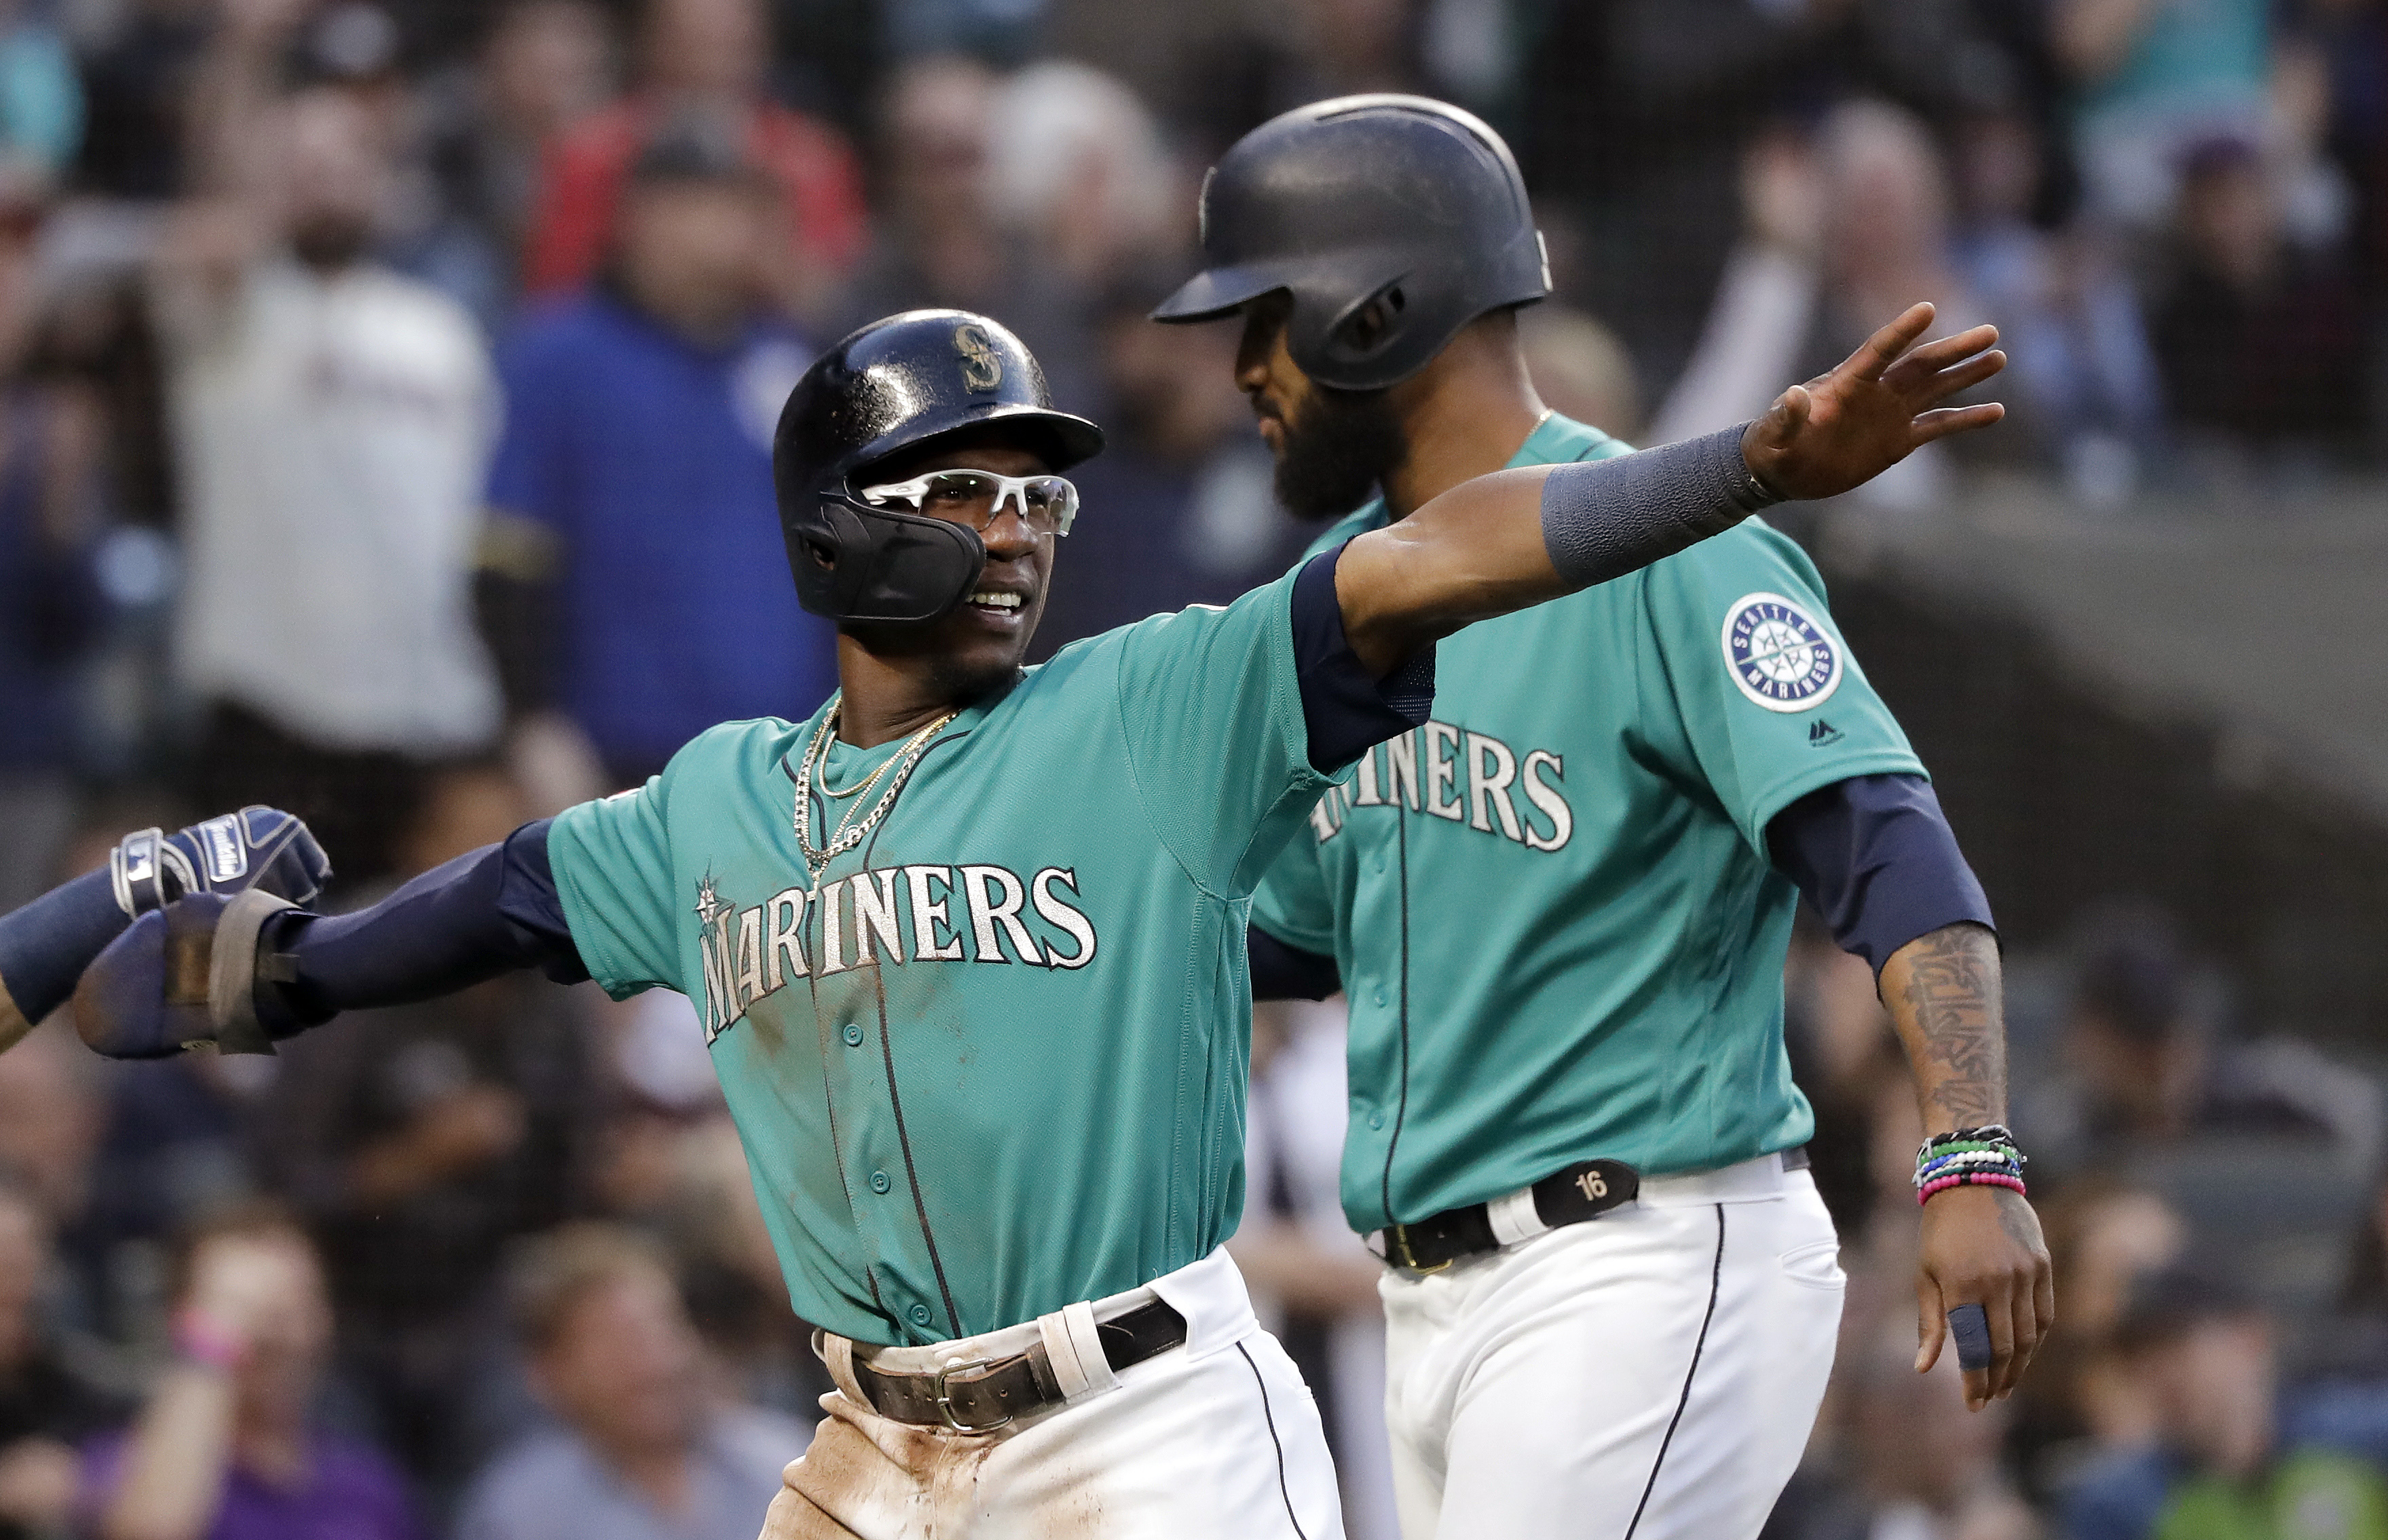 Leake tosses gem, Mariners hit 5 HRs in 14-1 win over Astros